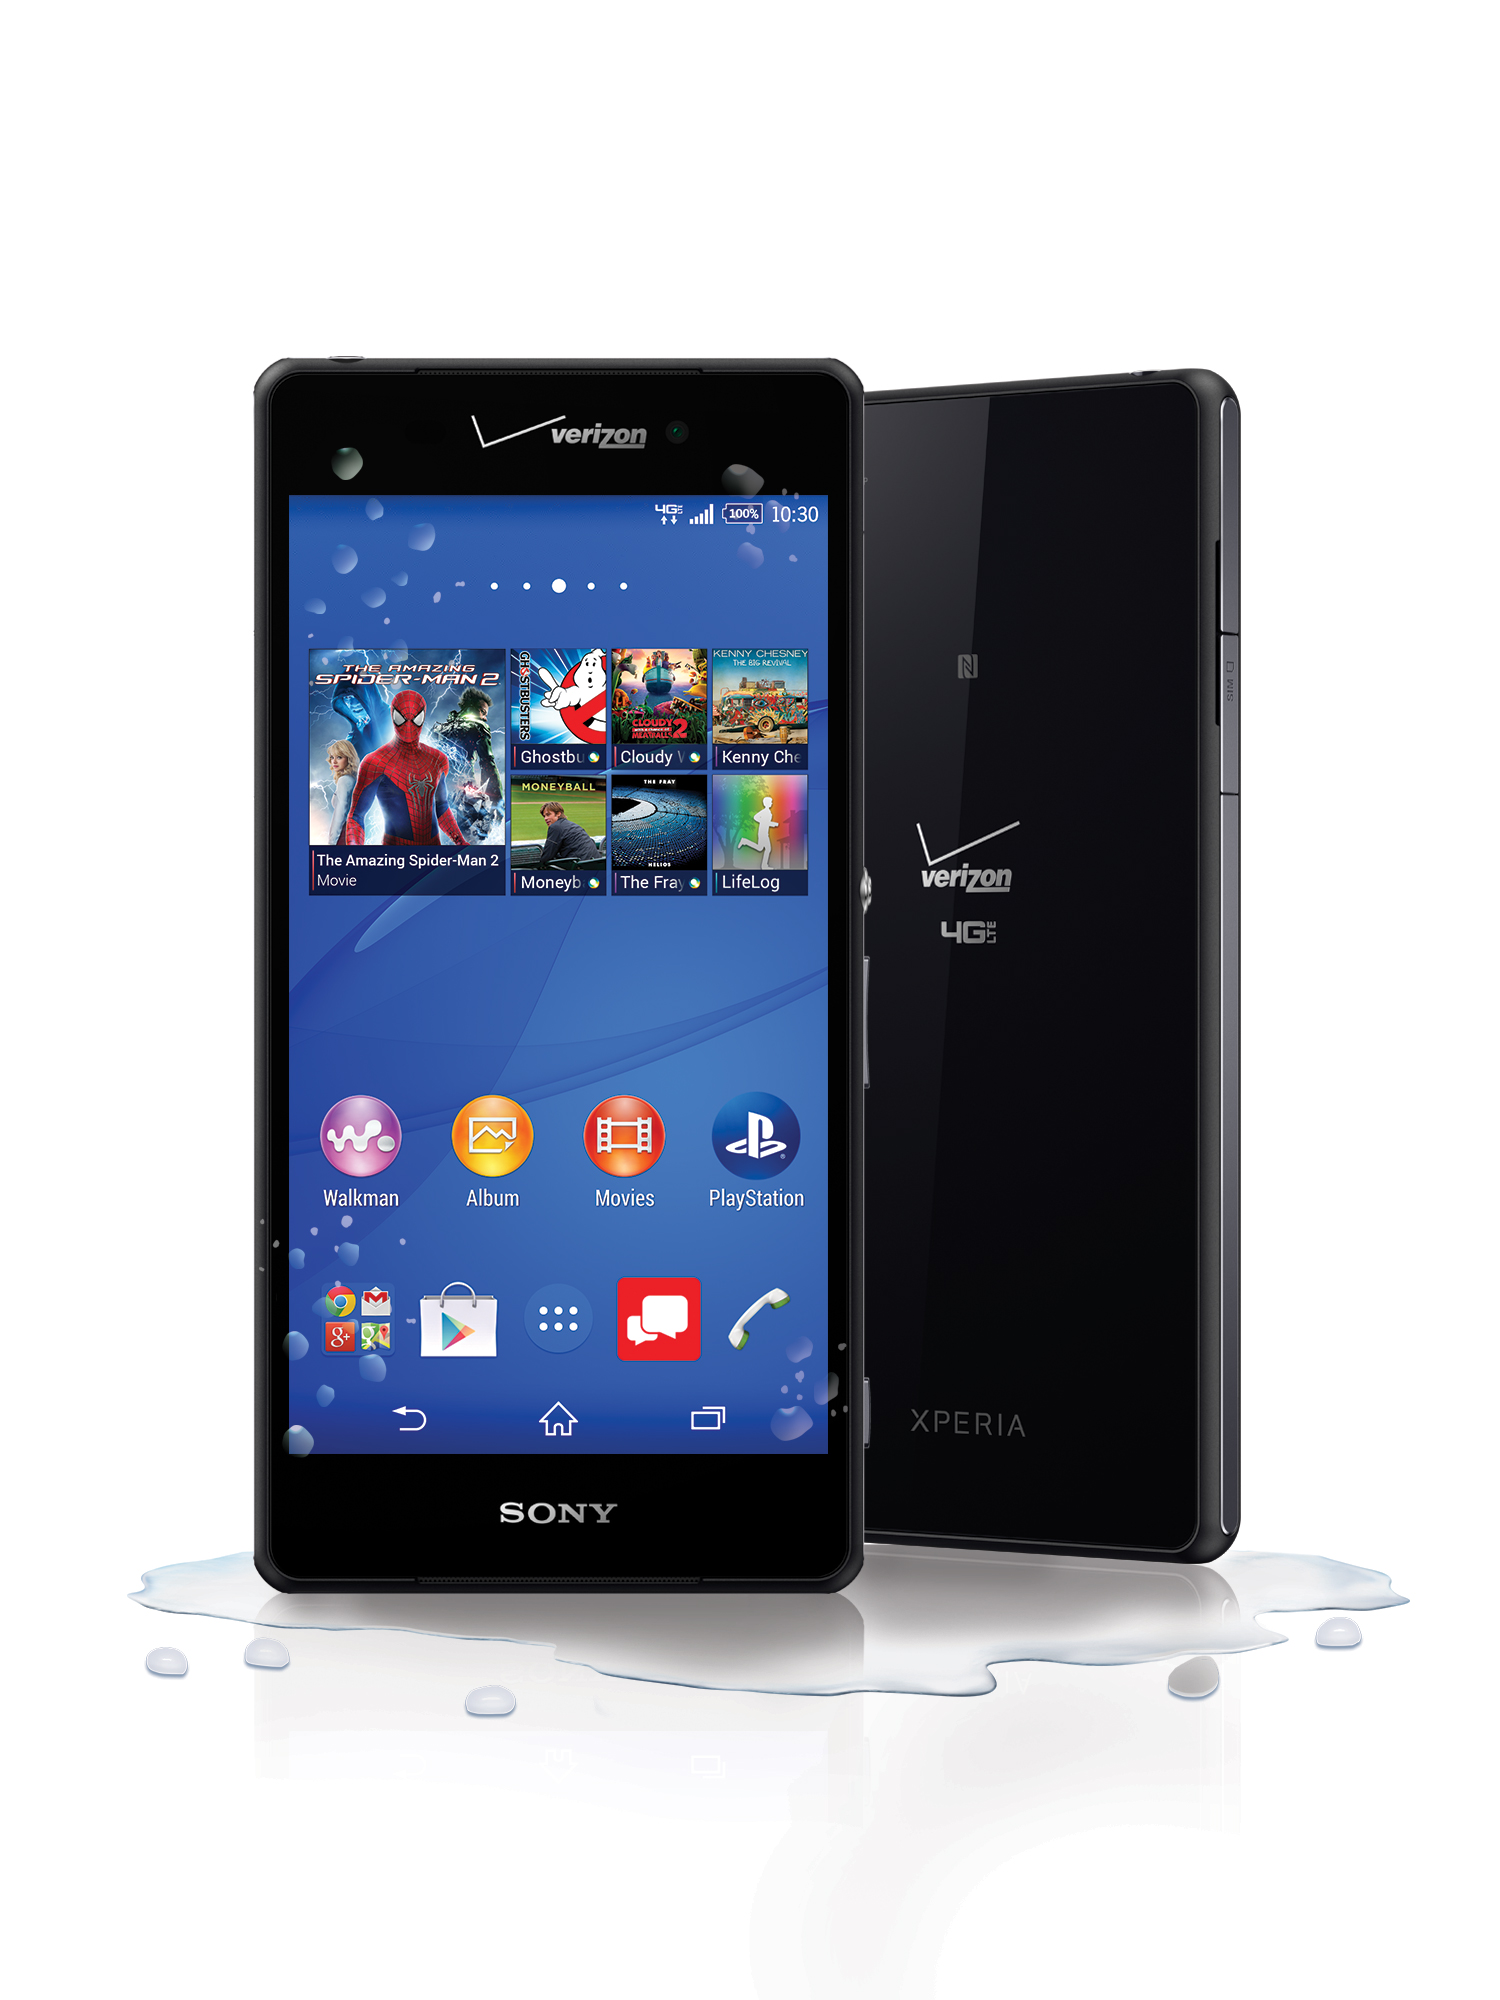 Sony Xperia Z3v: Waterproof, PlayStation®4 Gaming with Remote Play, Photography, and Verizon 4G LTE